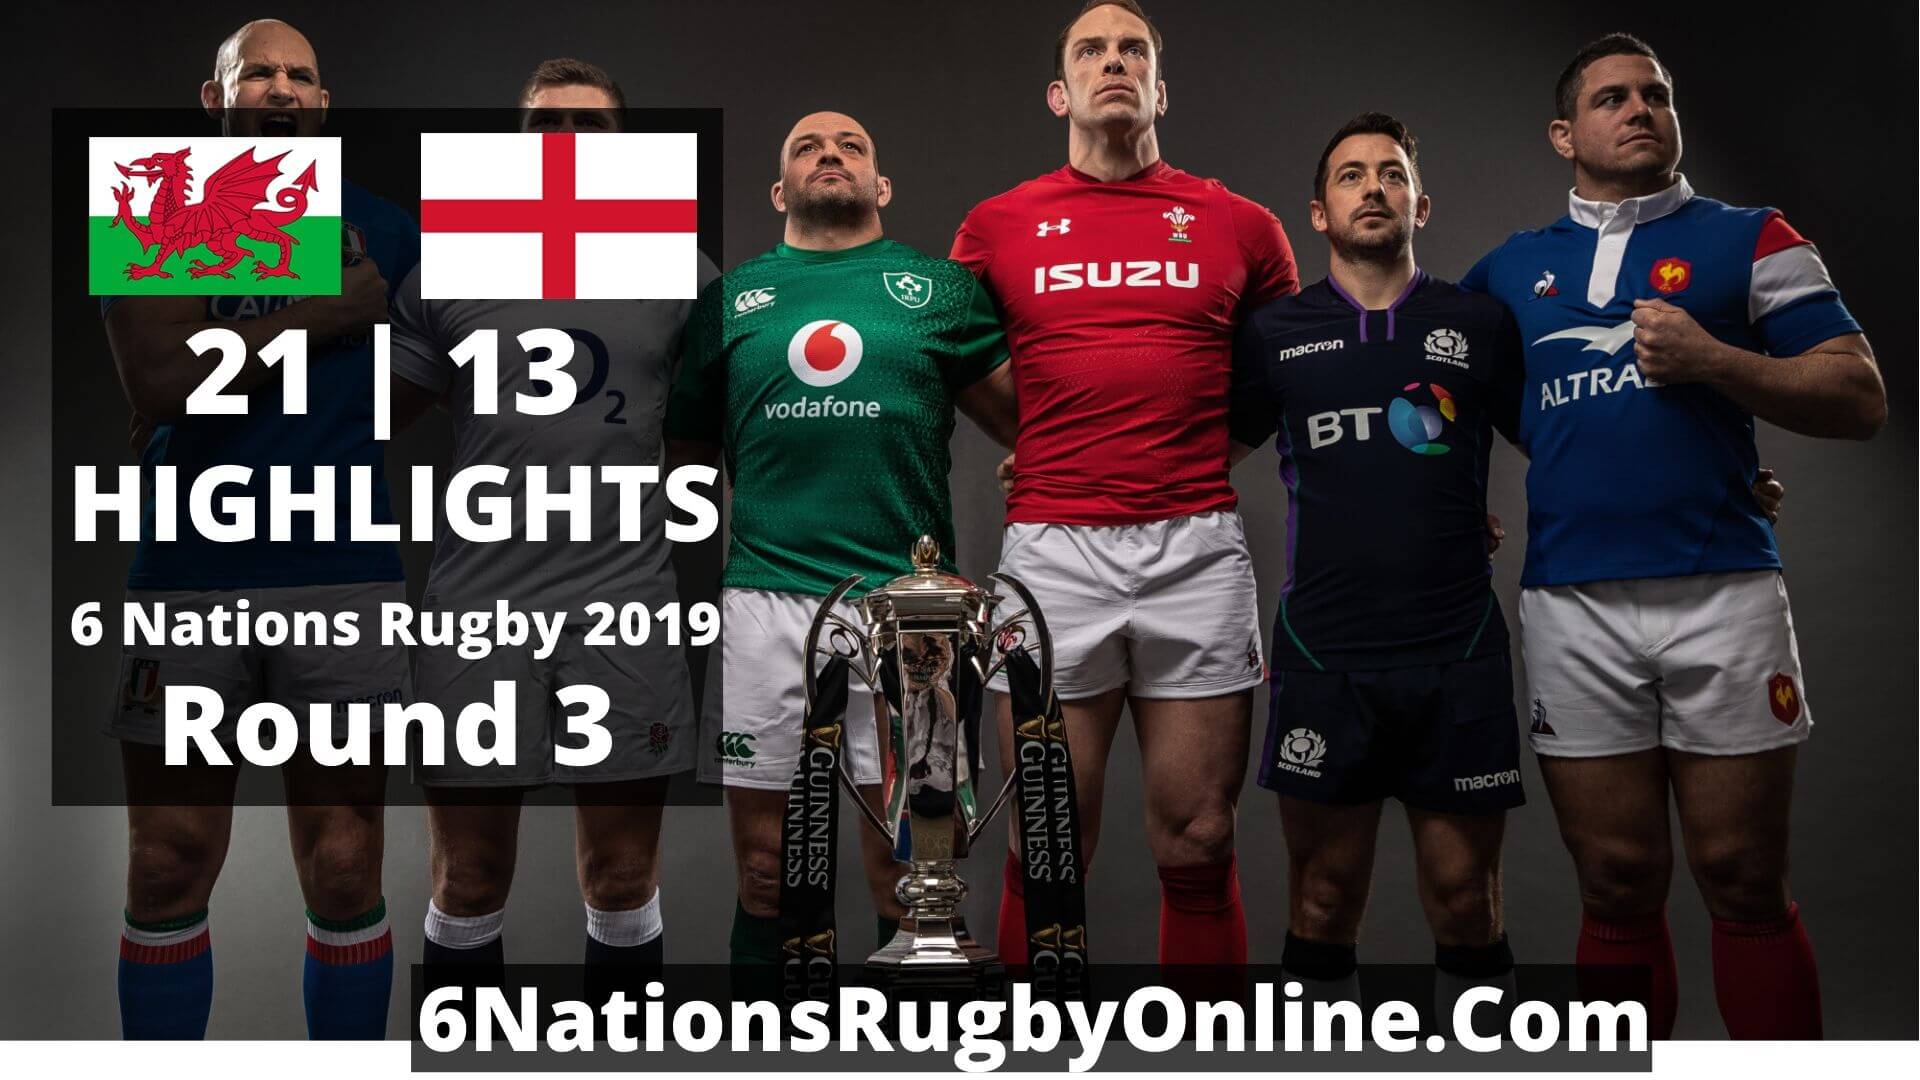 Wales Vs England Highlights 2019 Six Nations Rugby Round 3